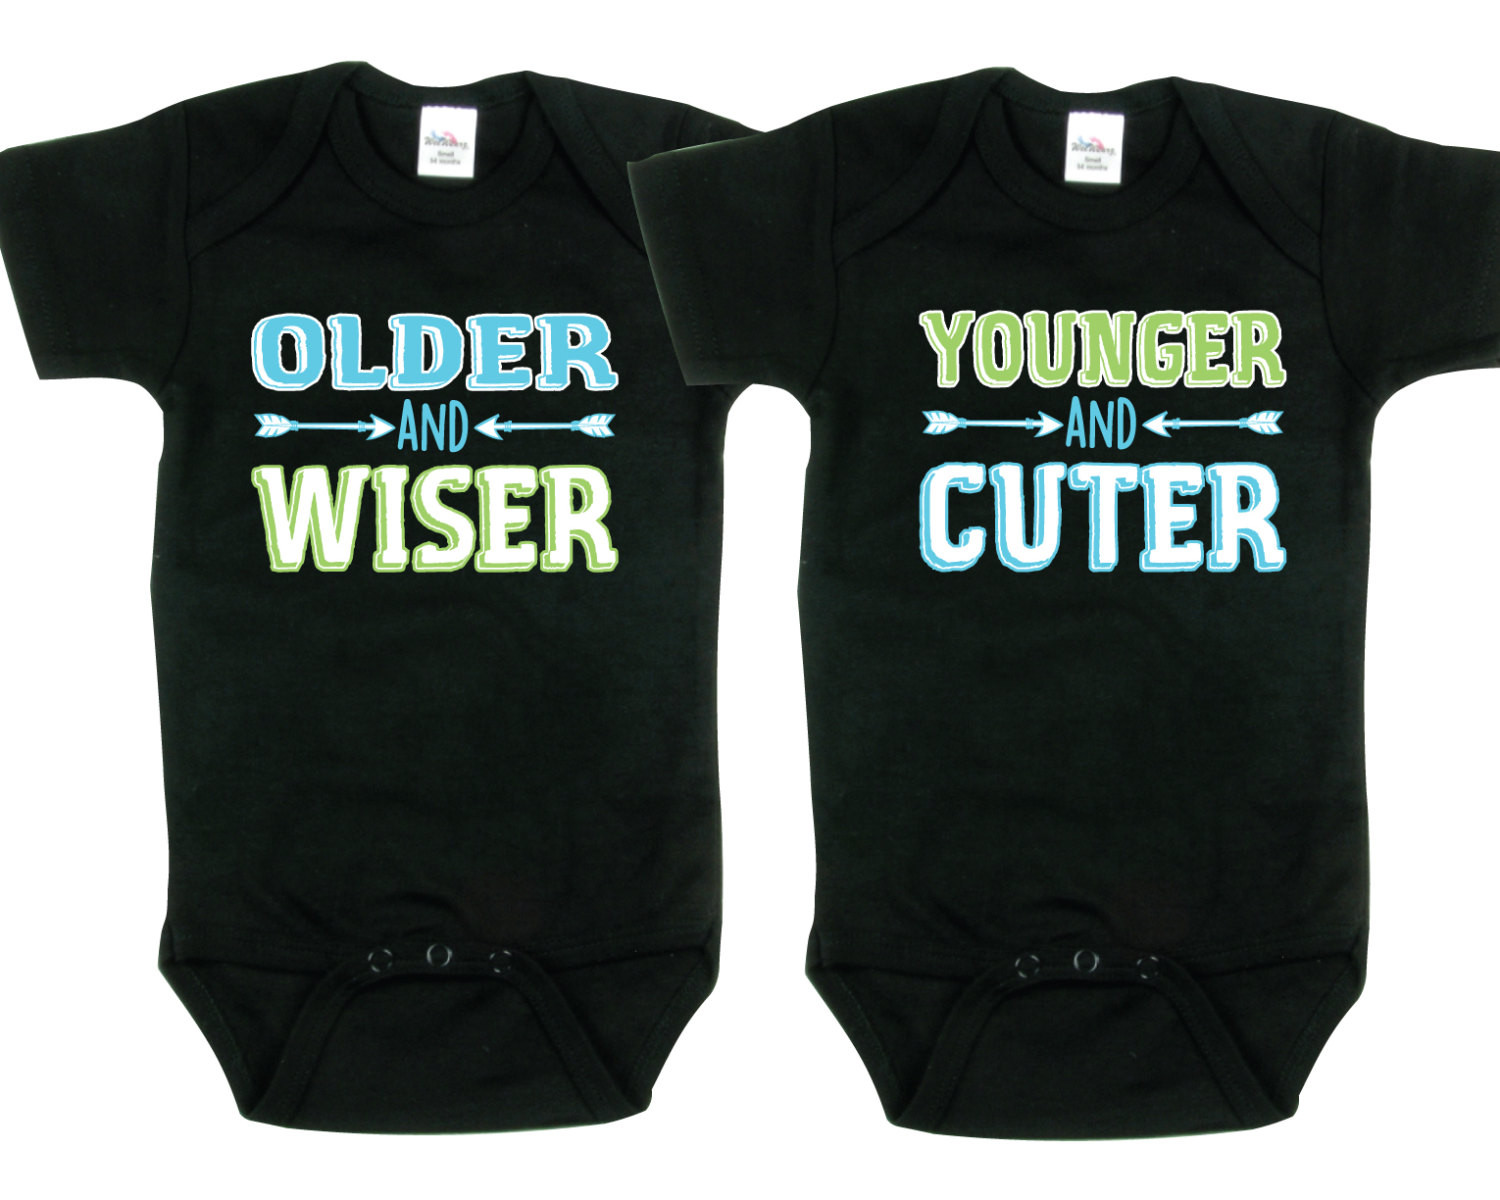 Gift Ideas For Twin Boys
 Twin Boys Gifts Older and Wiser Younger and Cuter Twin Boy